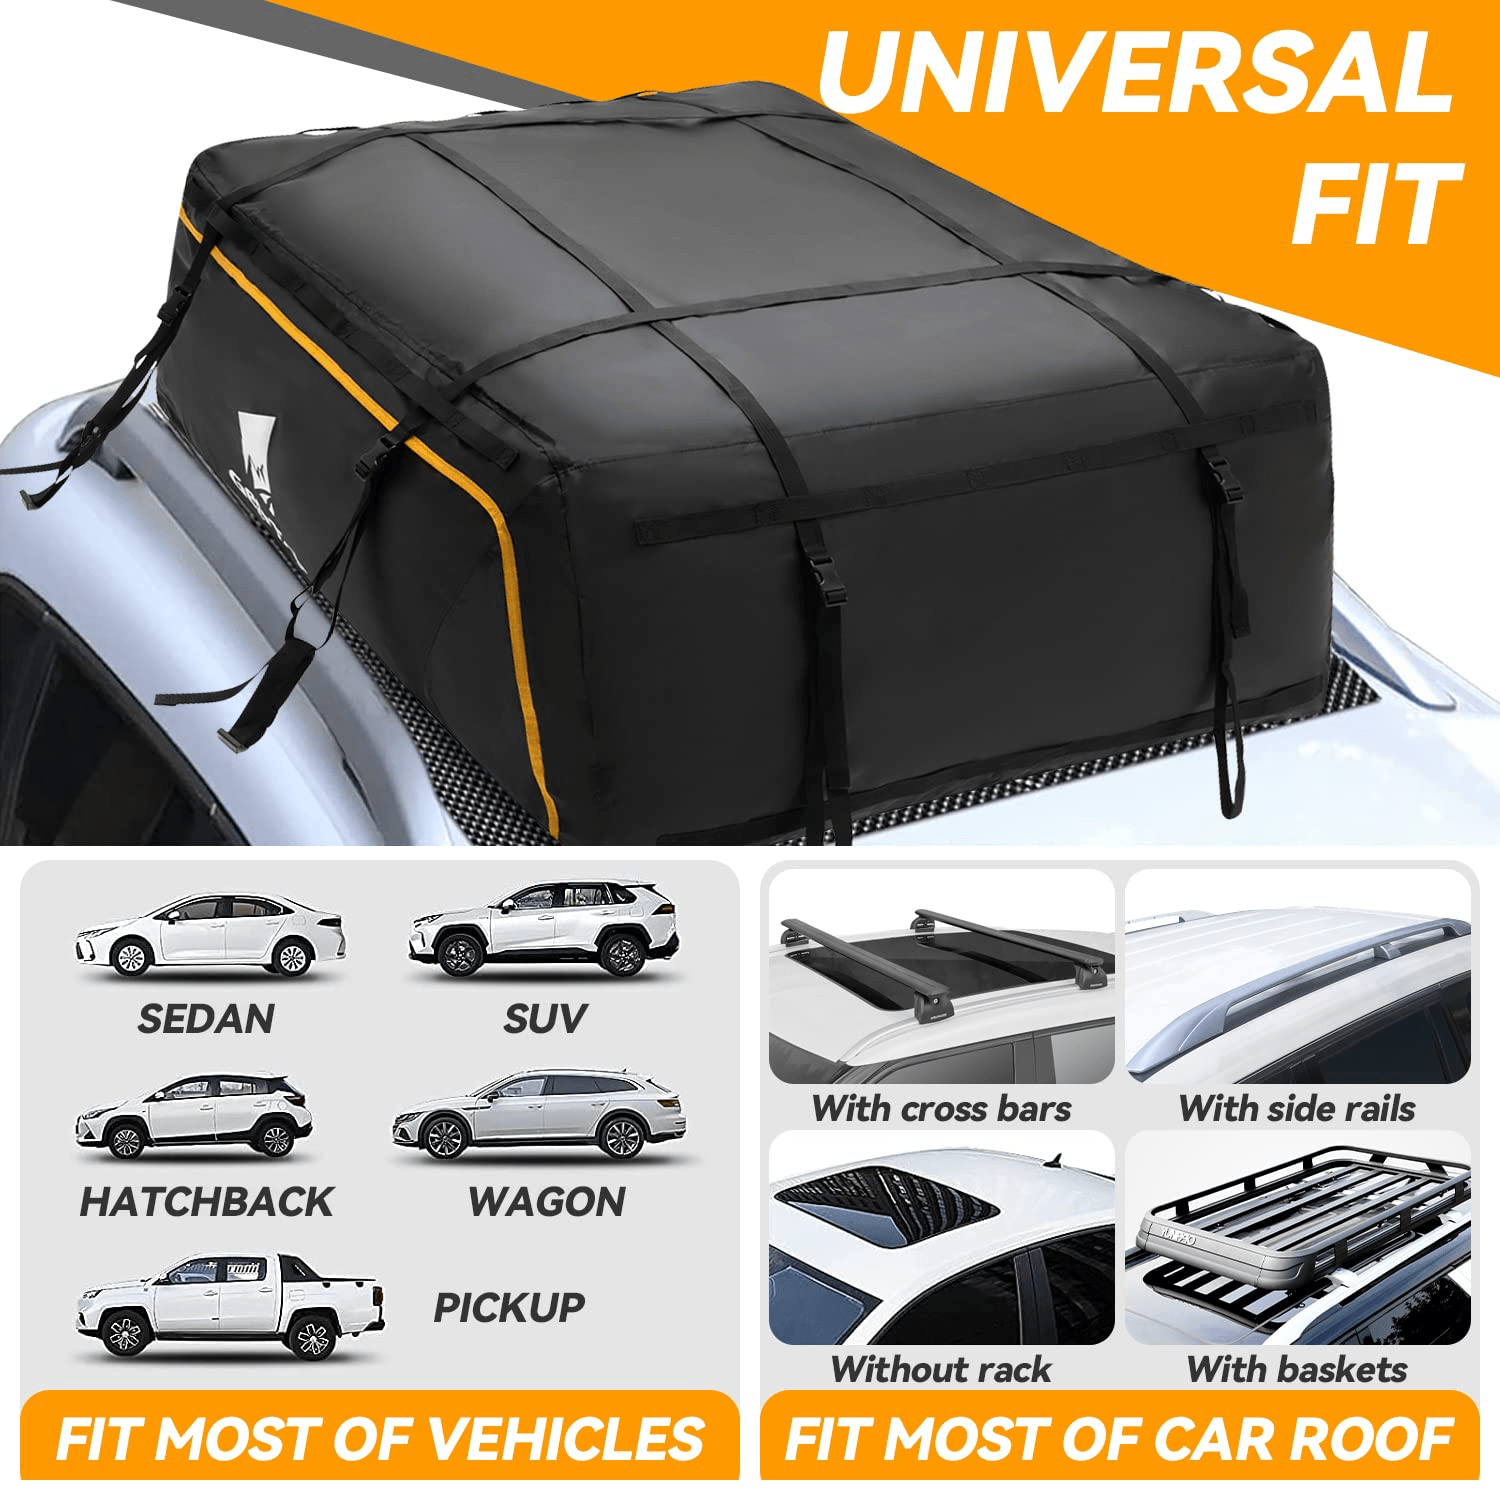 900d Waterproof Cargo Bag Car Roof Cargo Carrier Universal Luggage